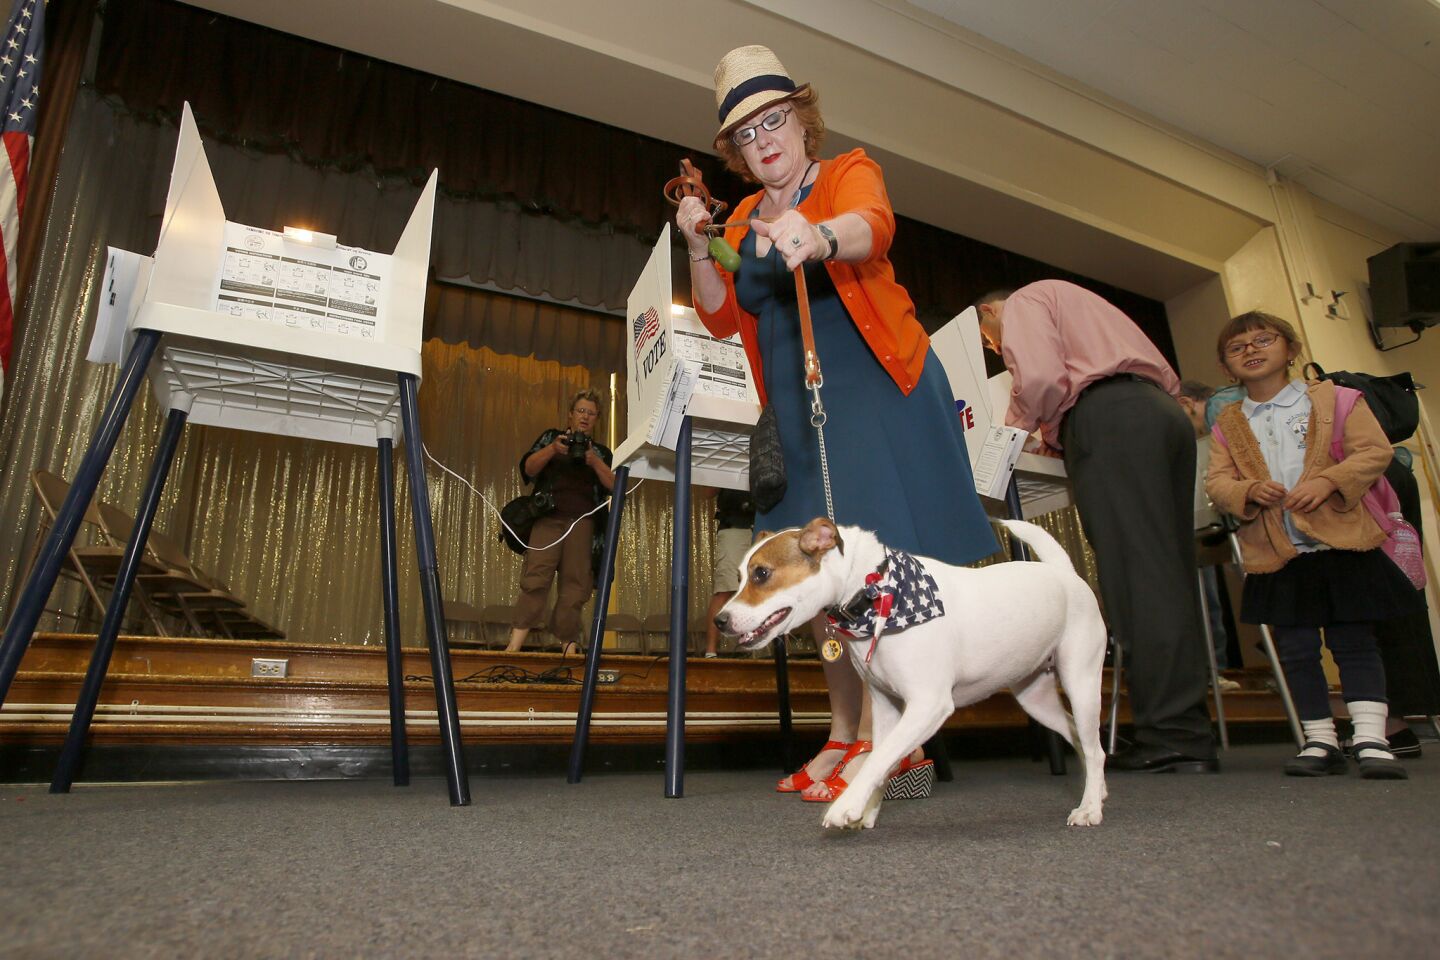 Deborah Murphy tries to control her dog Fiona while voting at Allesandro Elementary School.